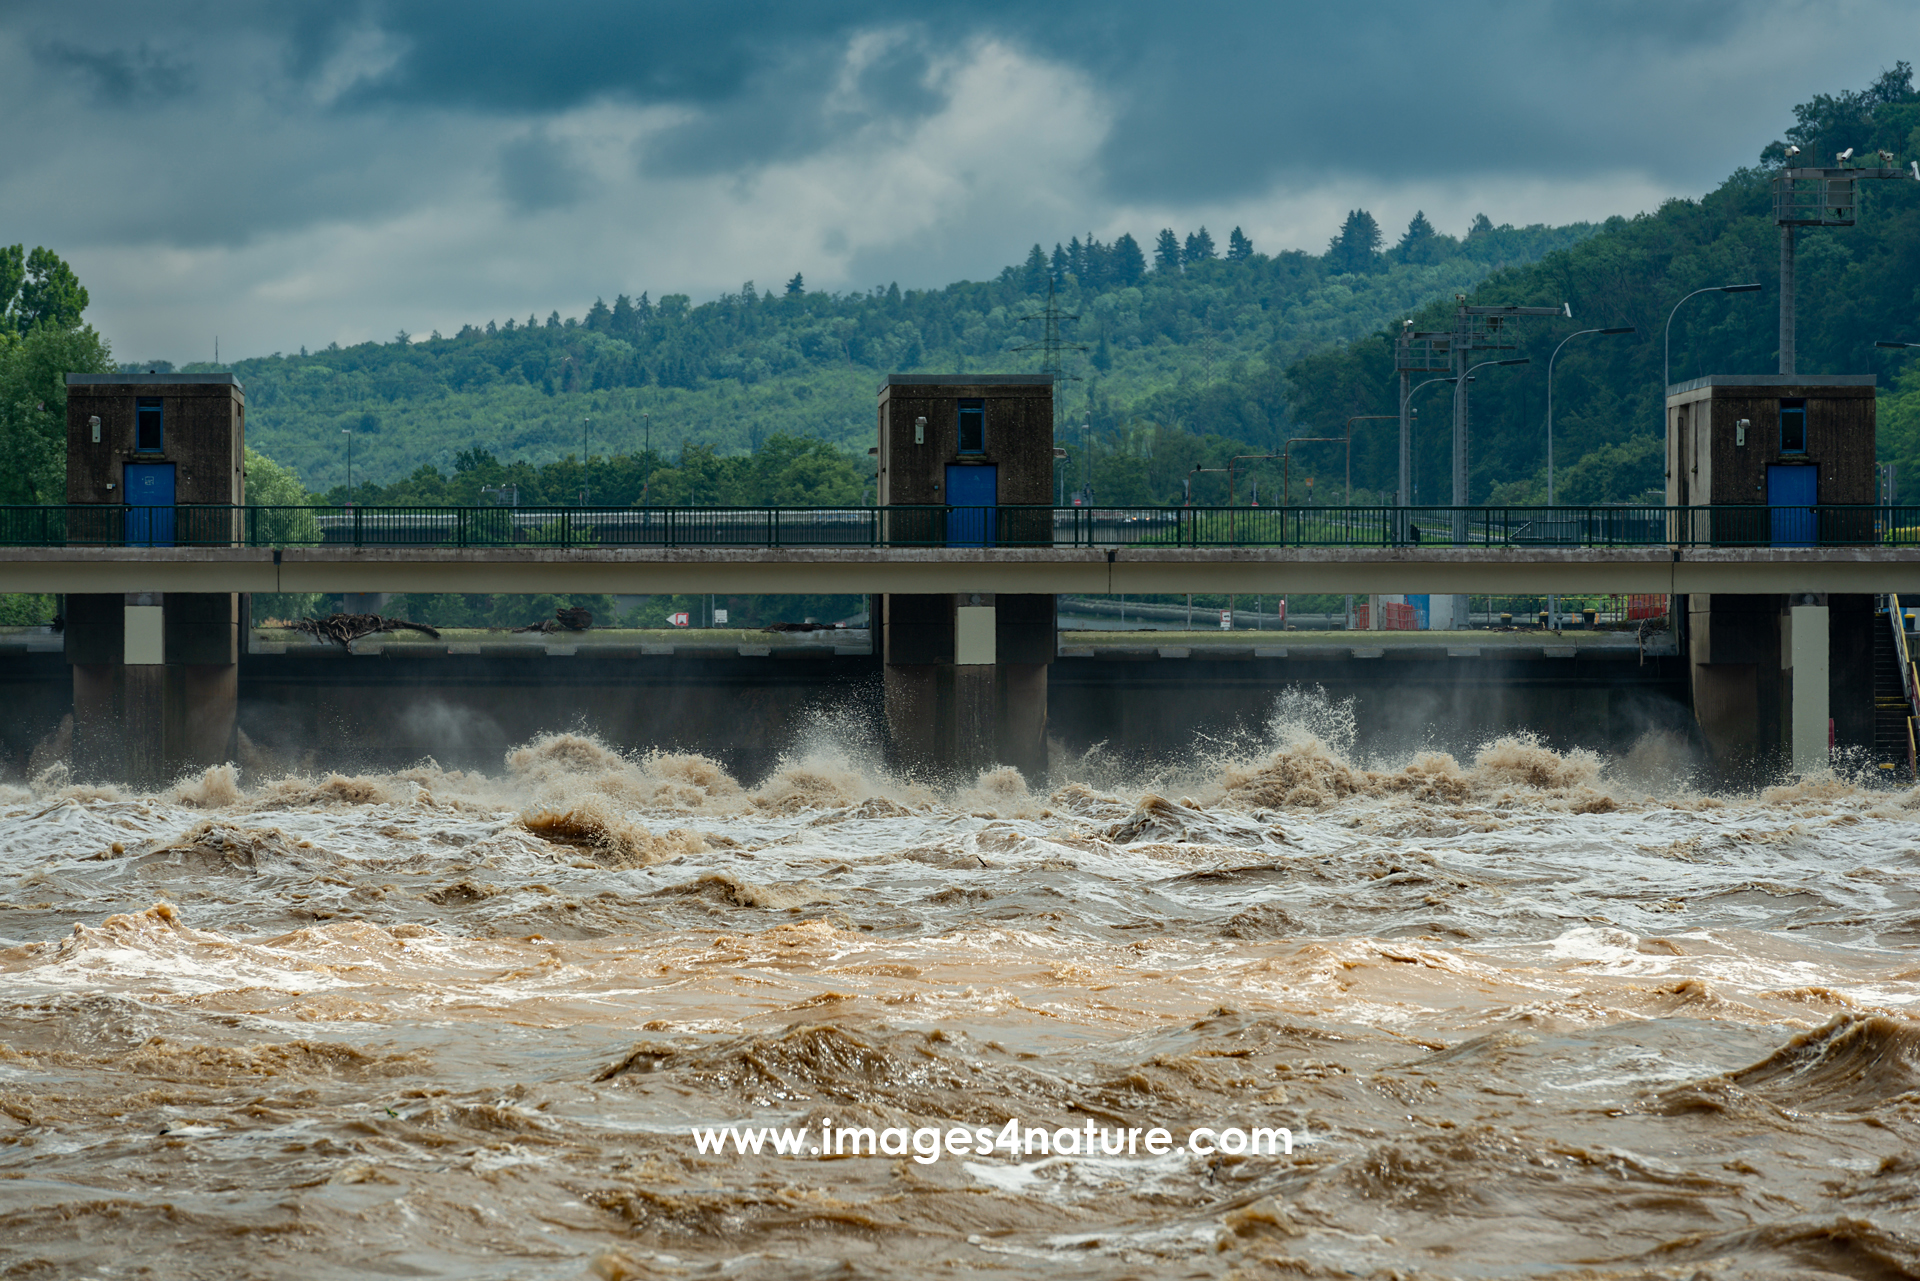 Close-up on the Neckar weir and lock at Esslingen during high water with strong waves and currents